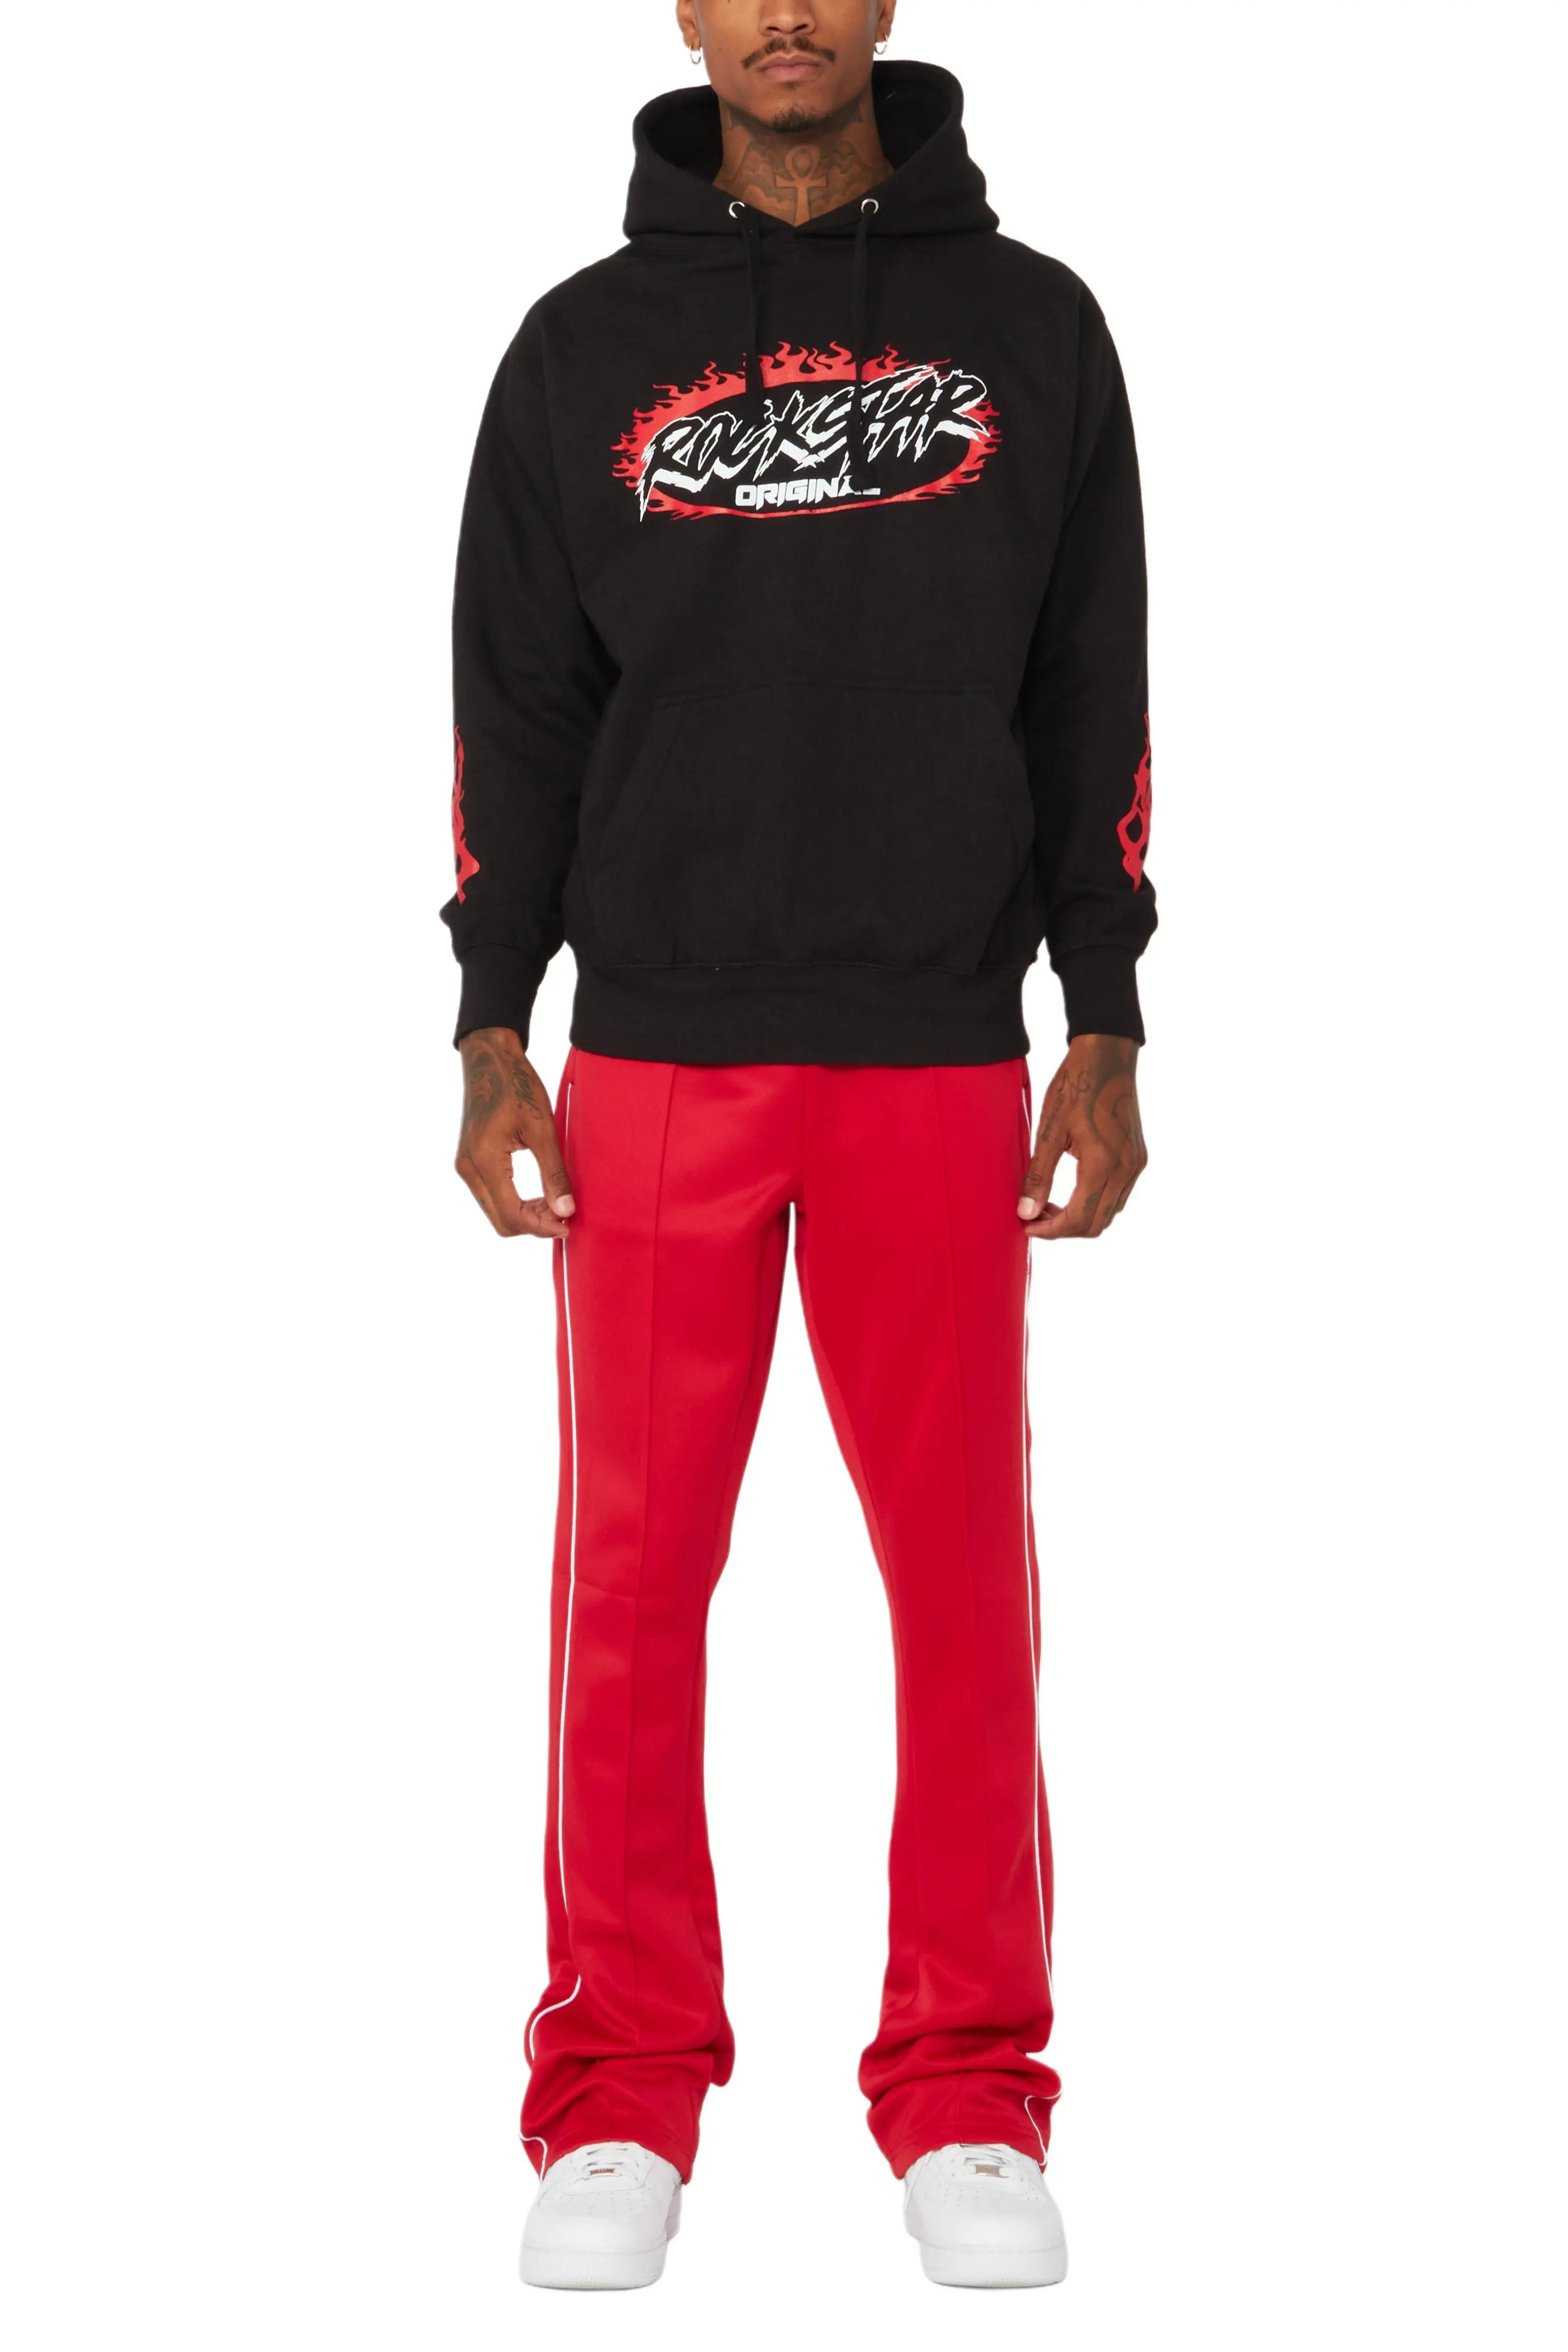 Alternate View 8 of Draven Black/Red Graphic Hoodie Track Set